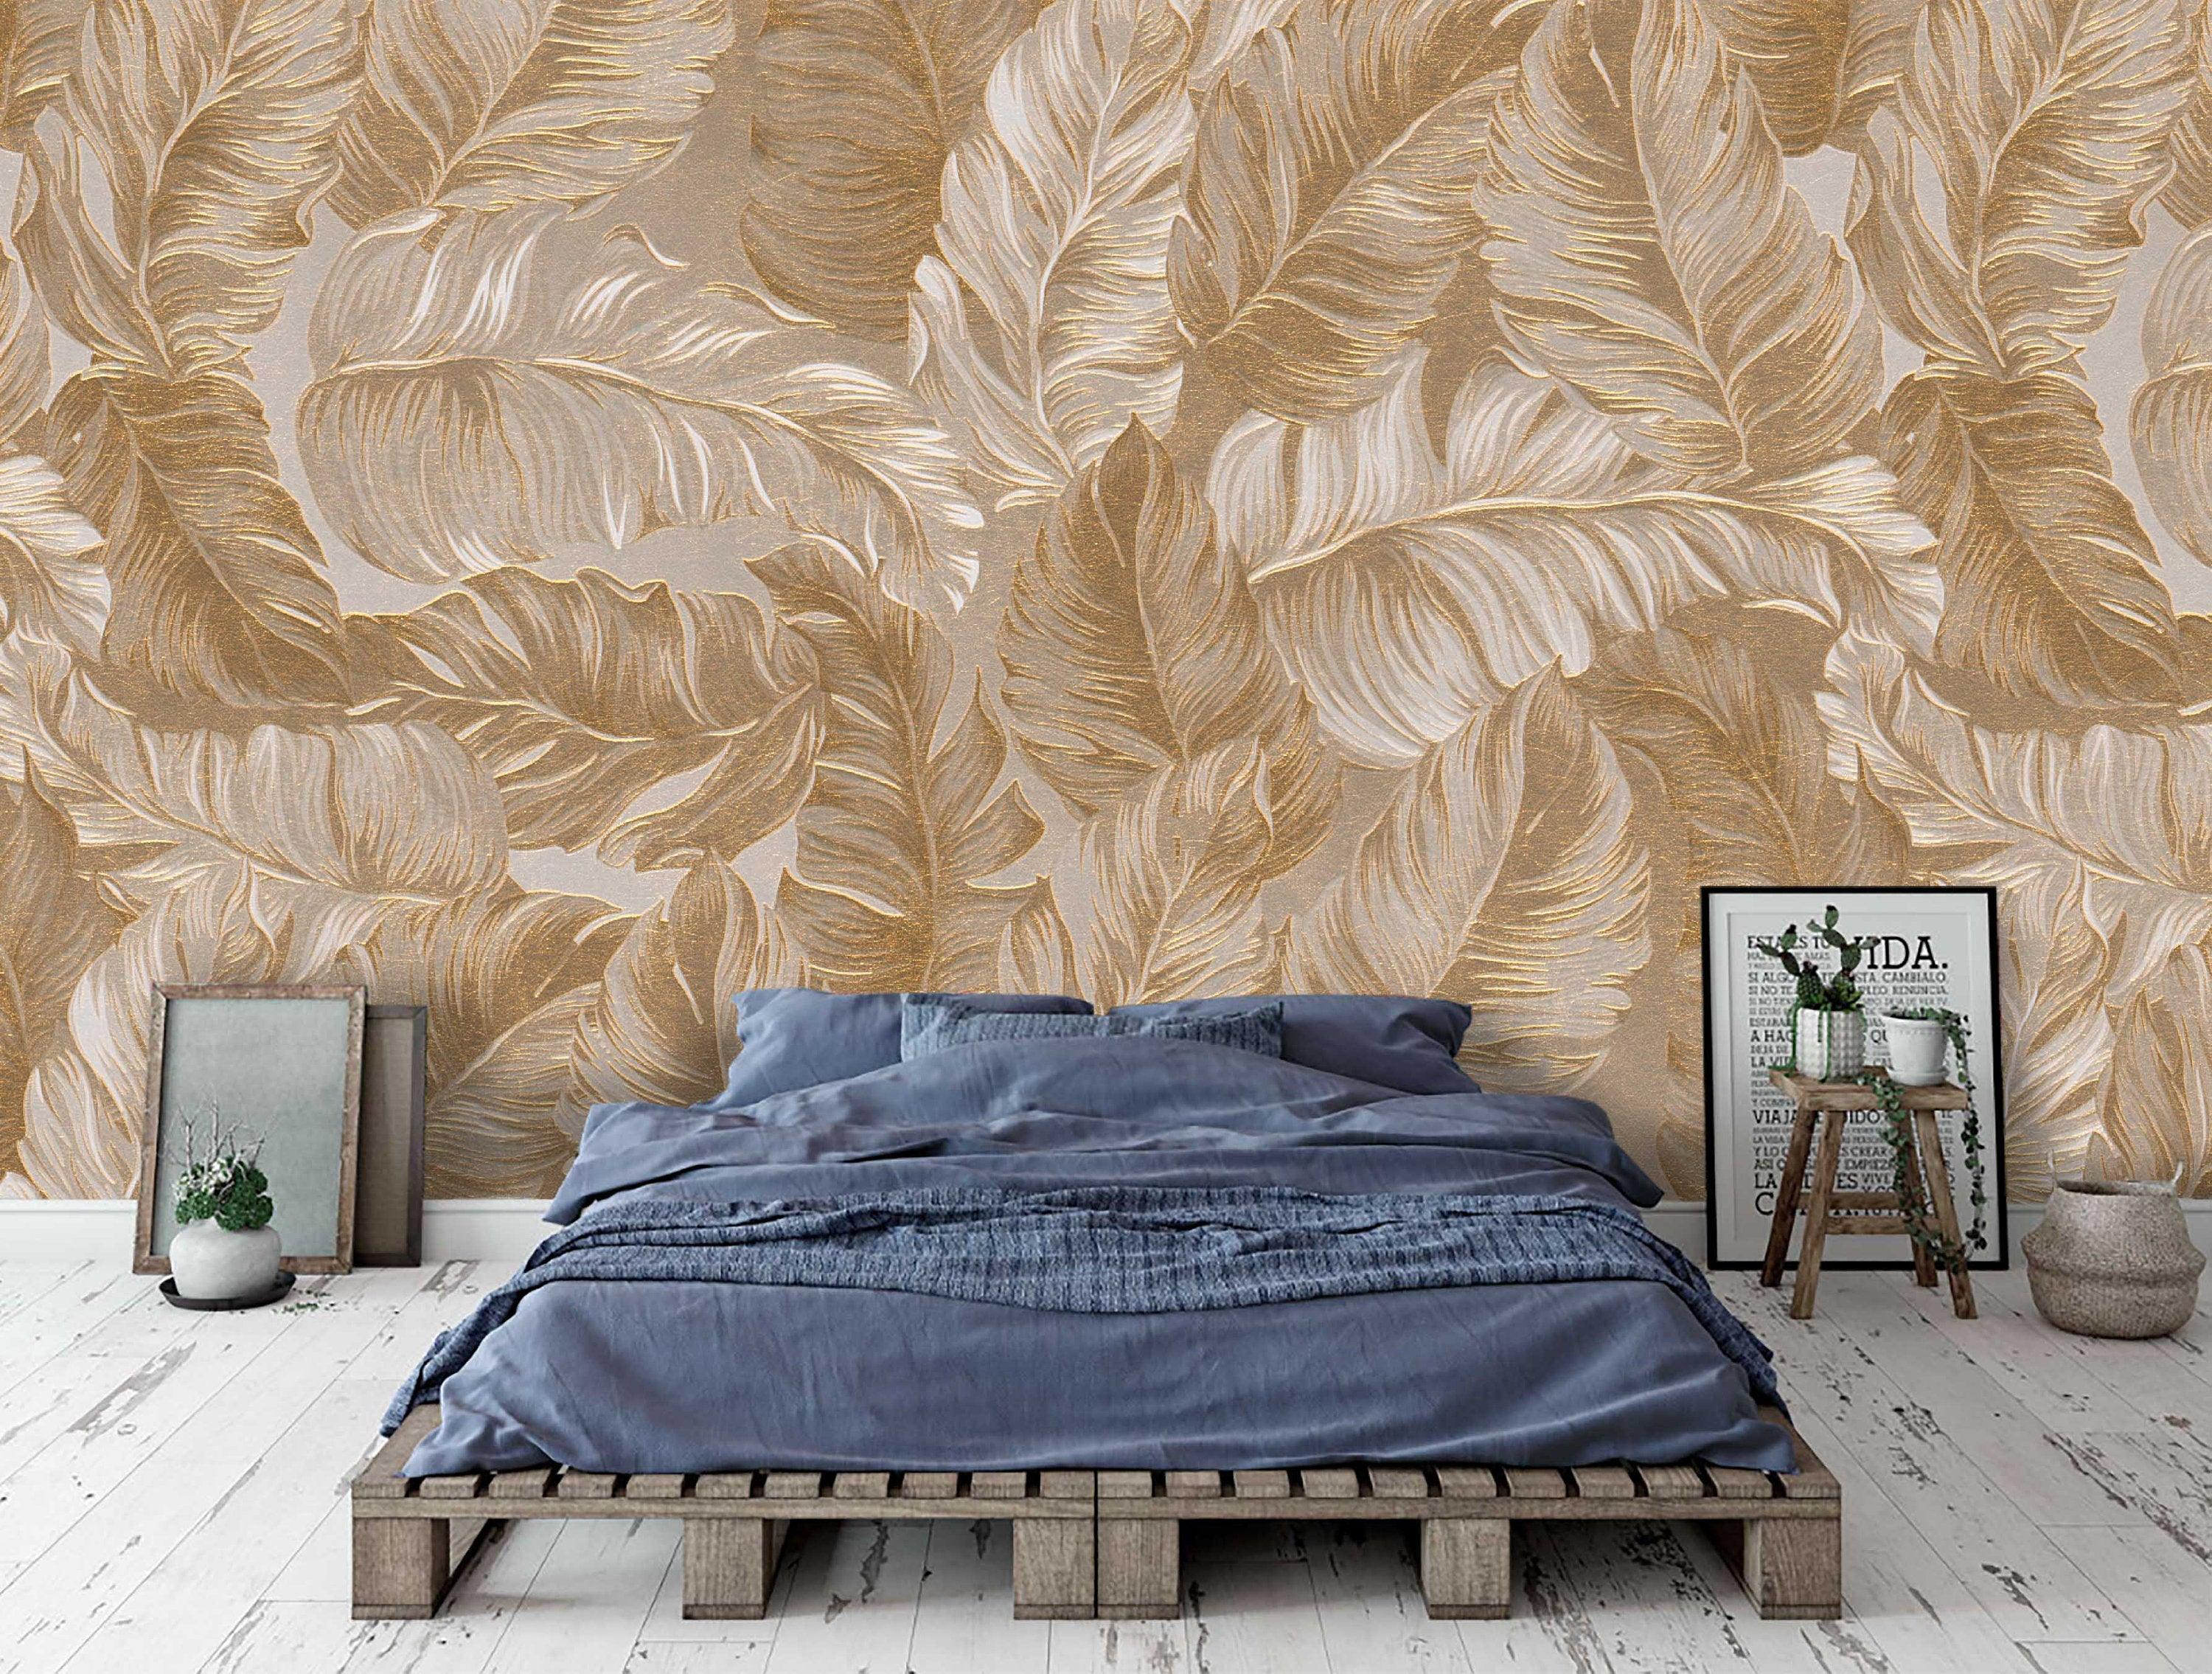 3D Tropics,Golden-white palm leaves,Tropical plants Wallpaper,Removable Self Adhesive Wallpaper, Wall Mural,Vintage art,Peel and Stick- Jess Art Decoration